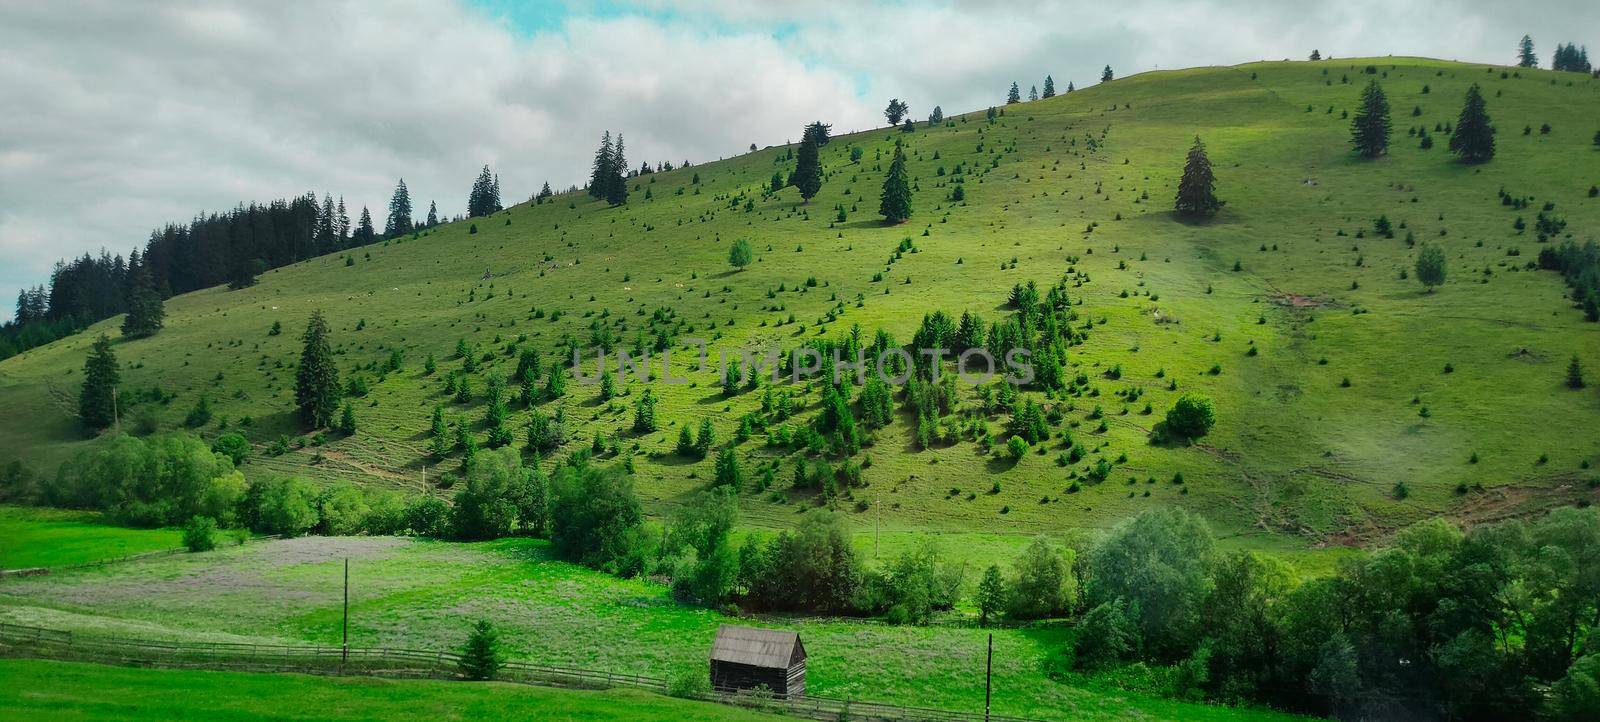 fir trees on meadow between hillsides with conifer forest . High quality photo